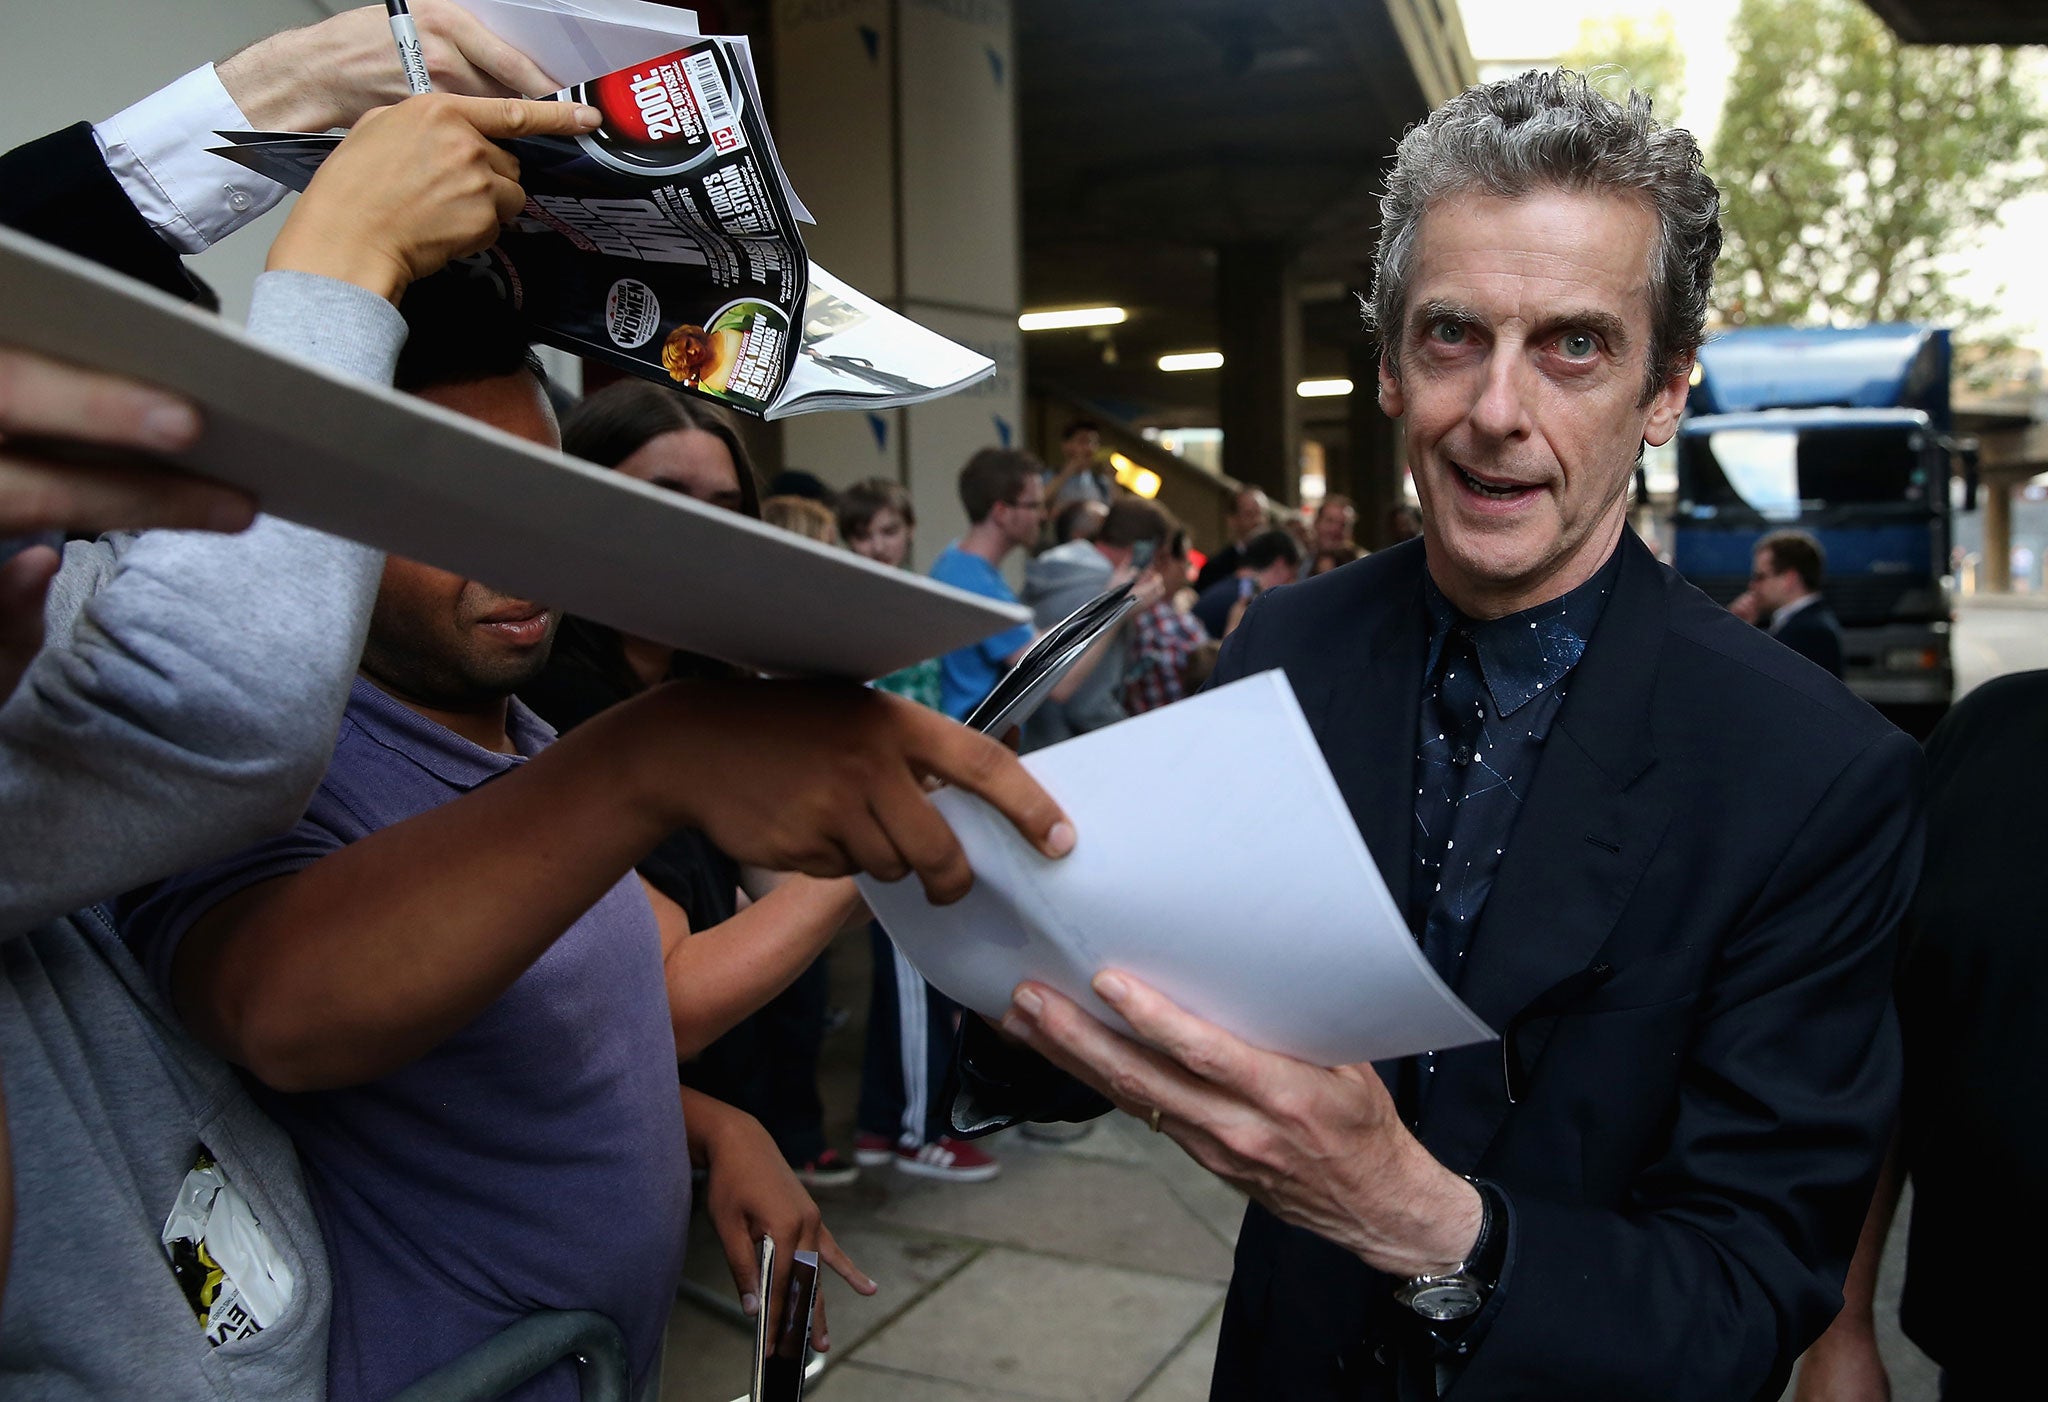 Doctor Who is a huge hit with fans